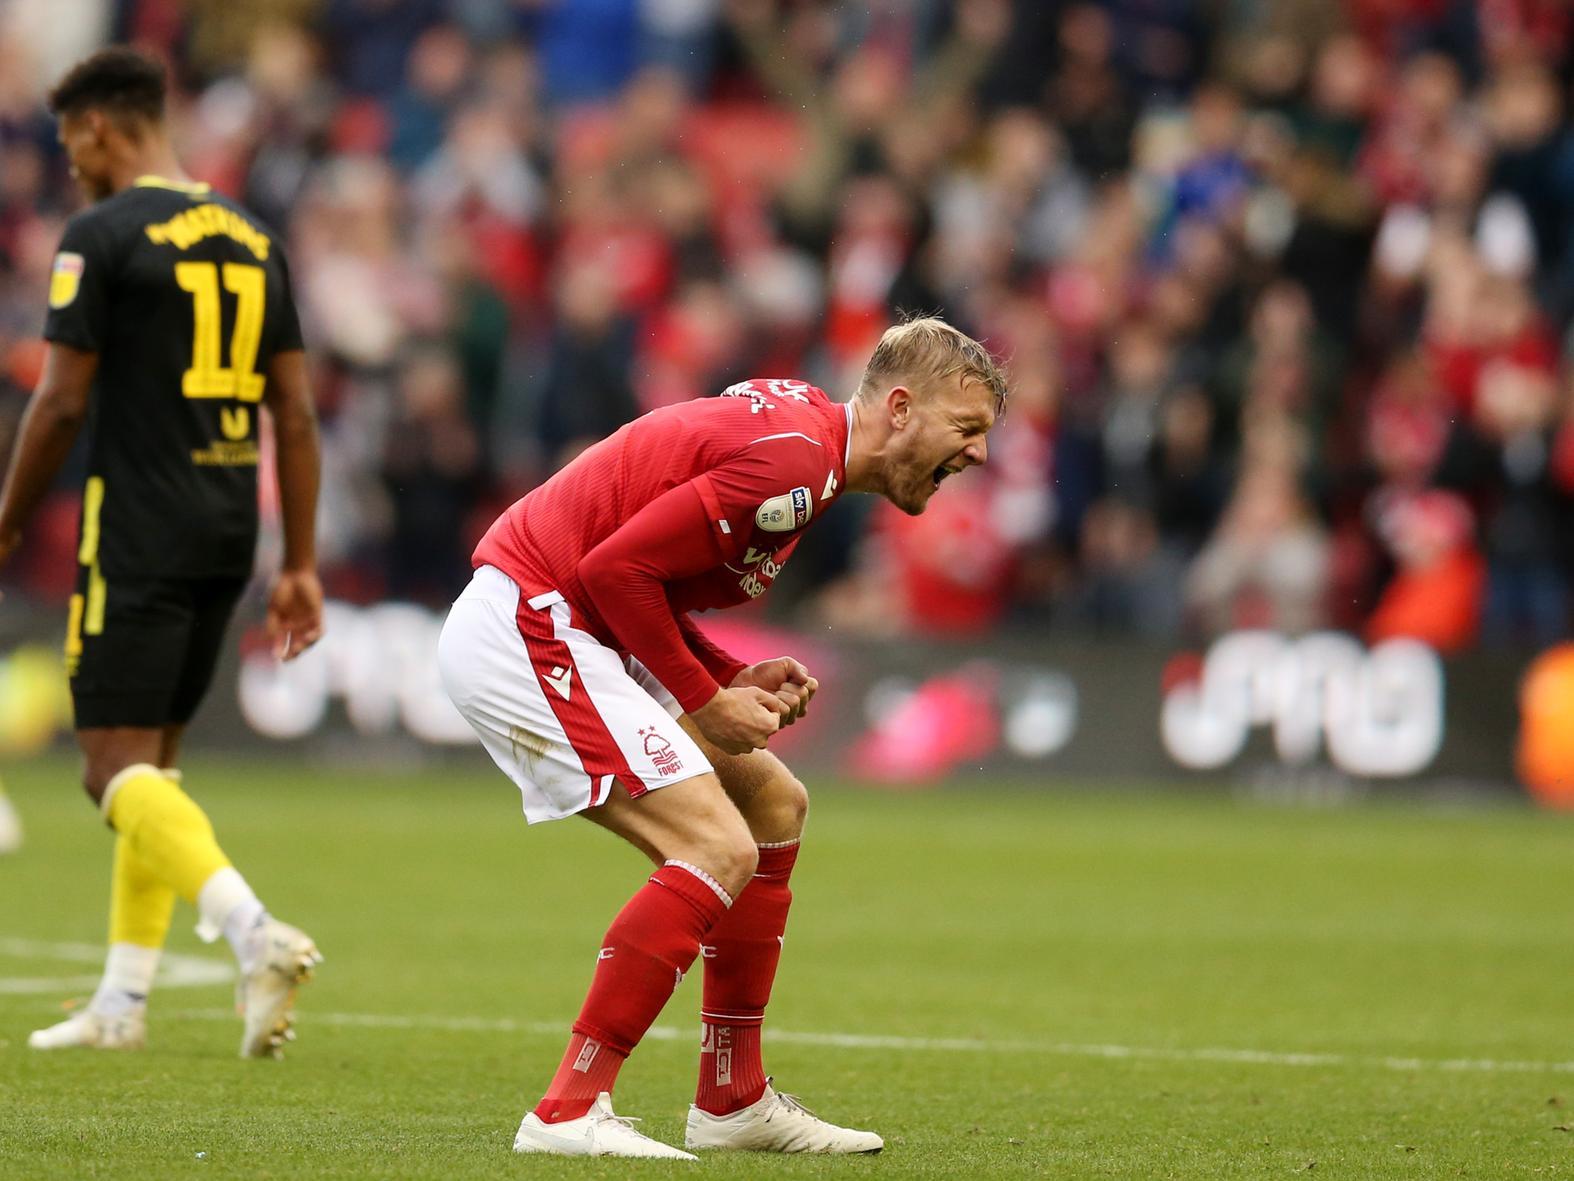 Nottingham Forest defender Joe Worrall is likely to be the subject of much interest during the transfer window, with Norwich City among the front-runners to sign him. (The 72)